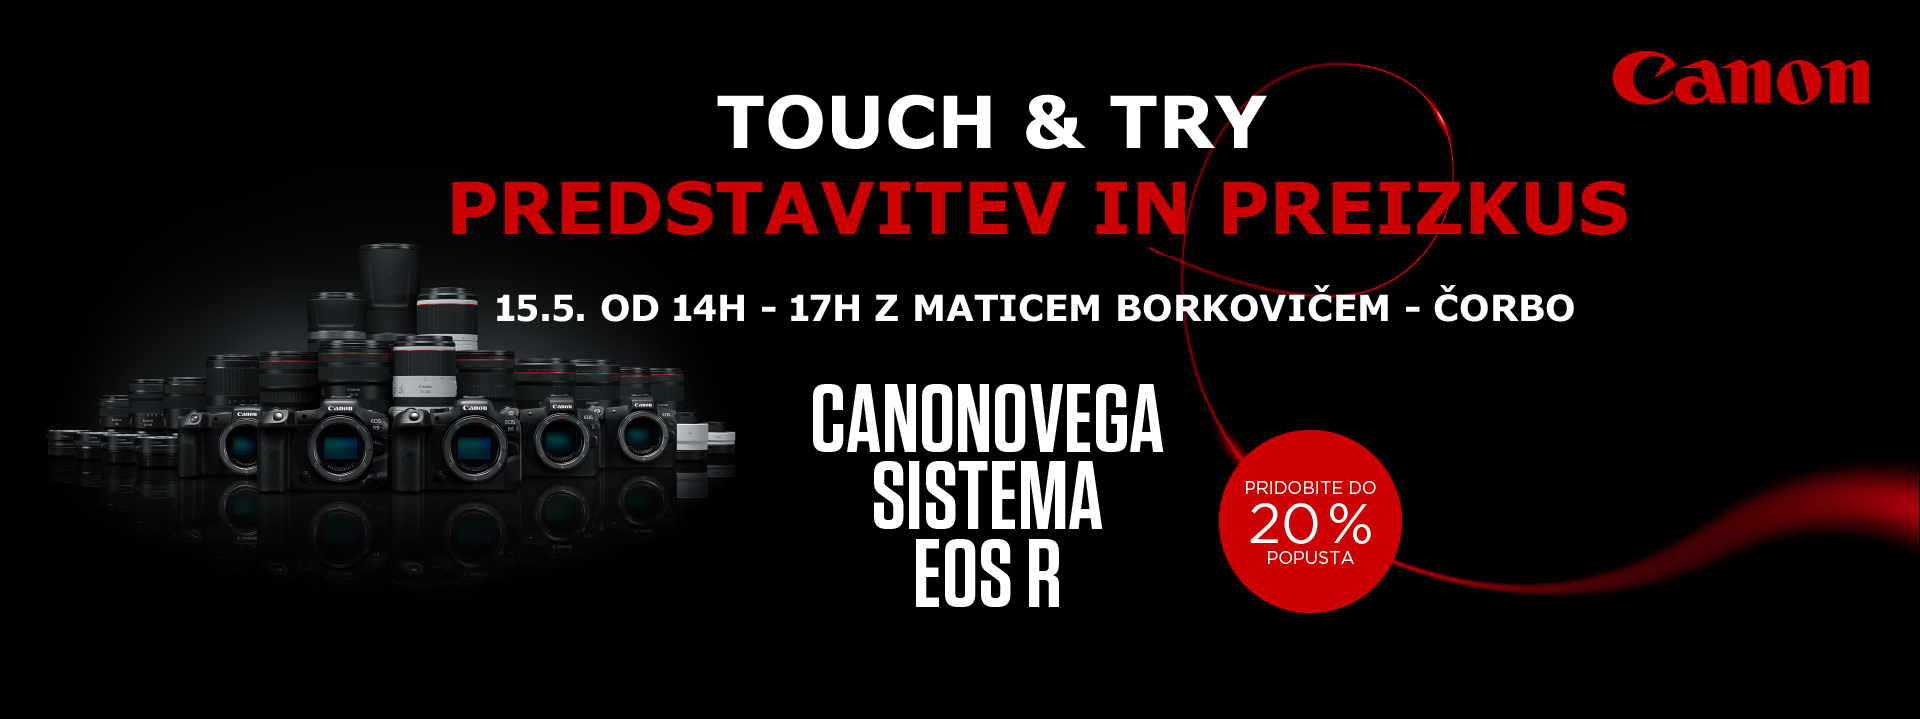 CANON EOS R TOUCH & TRY 15.5.2024 14H-17H